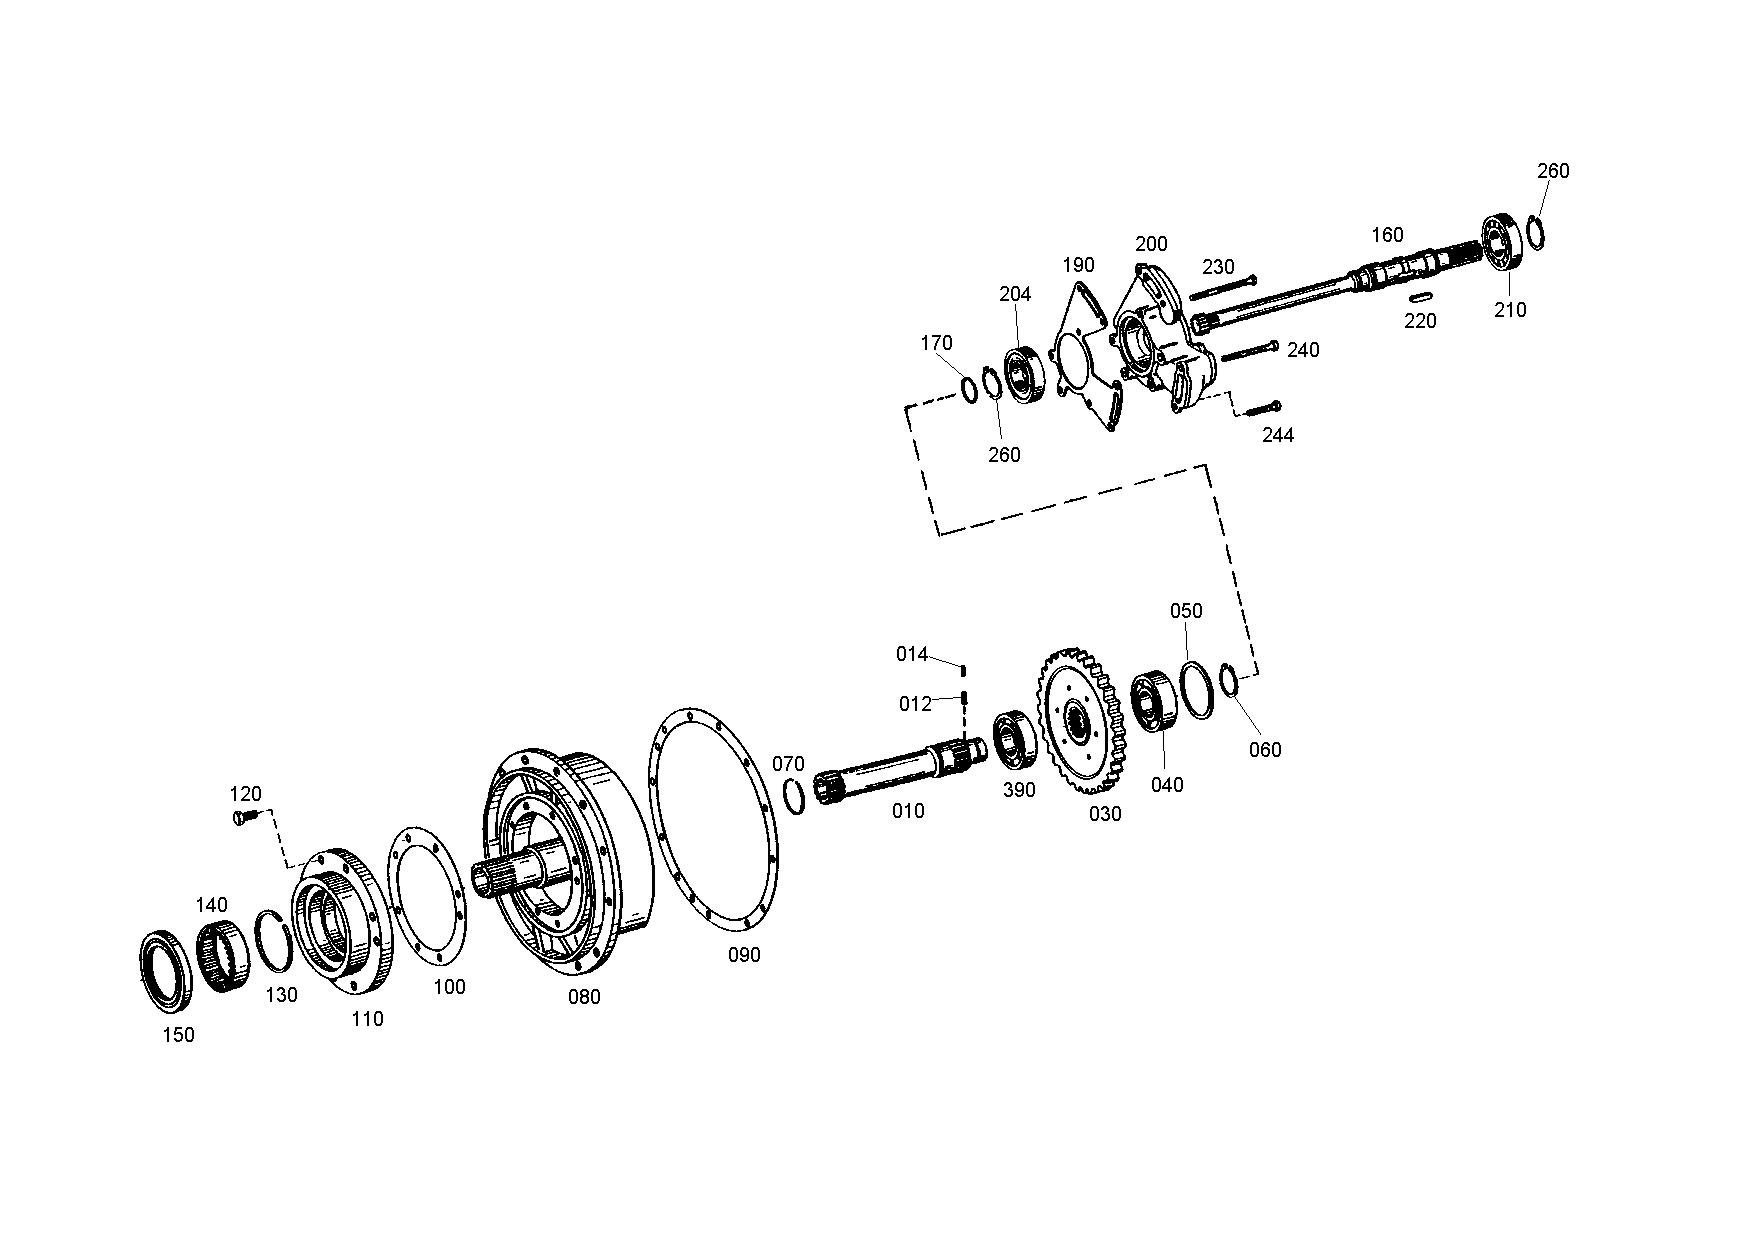 drawing for CNH NEW HOLLAND 199139A1 - INPUT GEAR (figure 1)